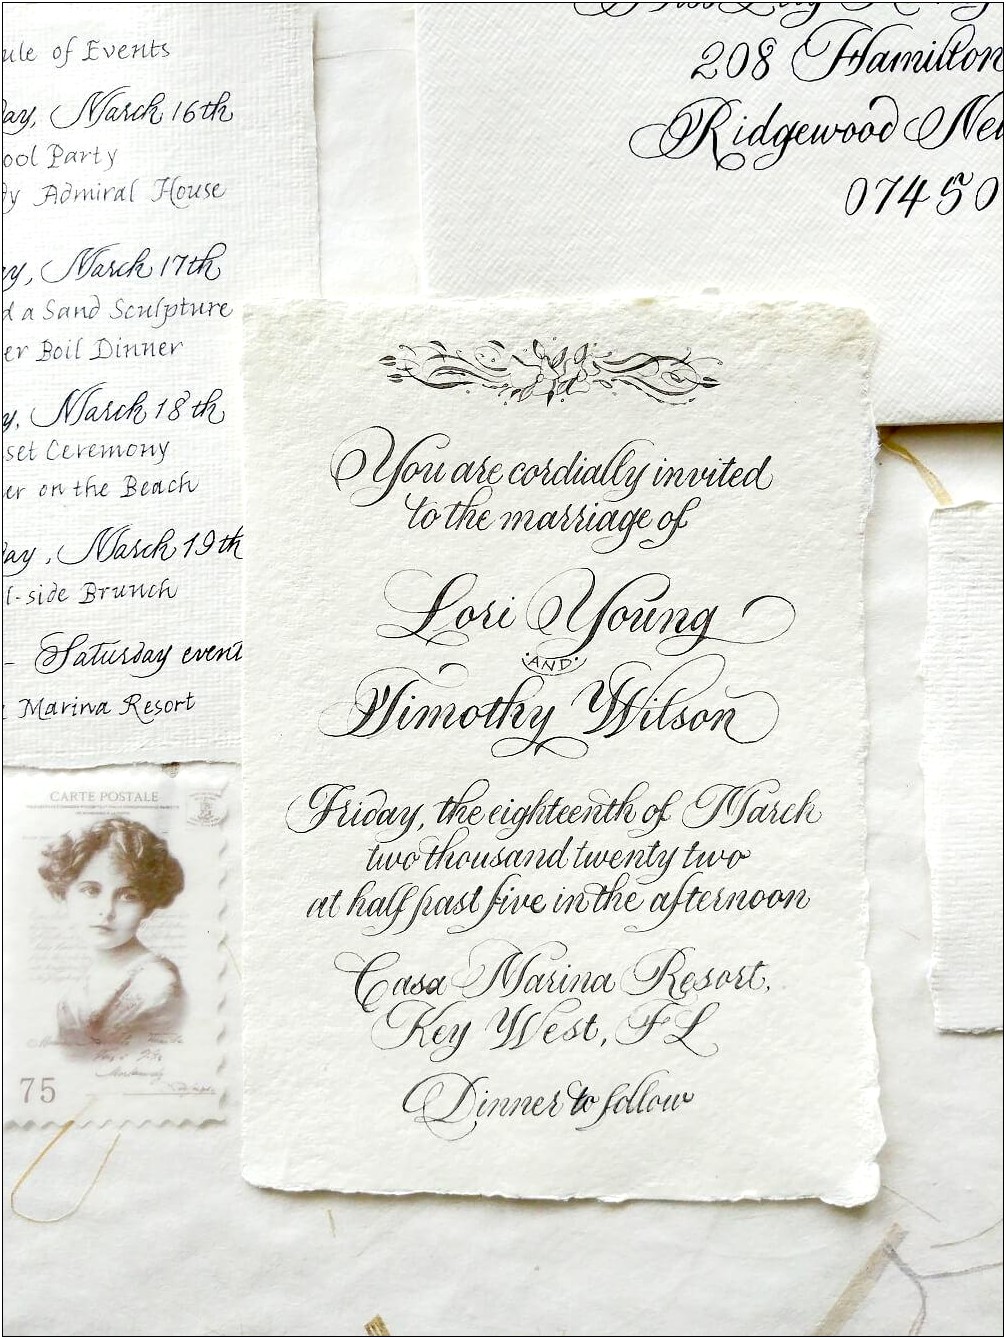 Do Wedding Invitations Have To Be Hand Addressed